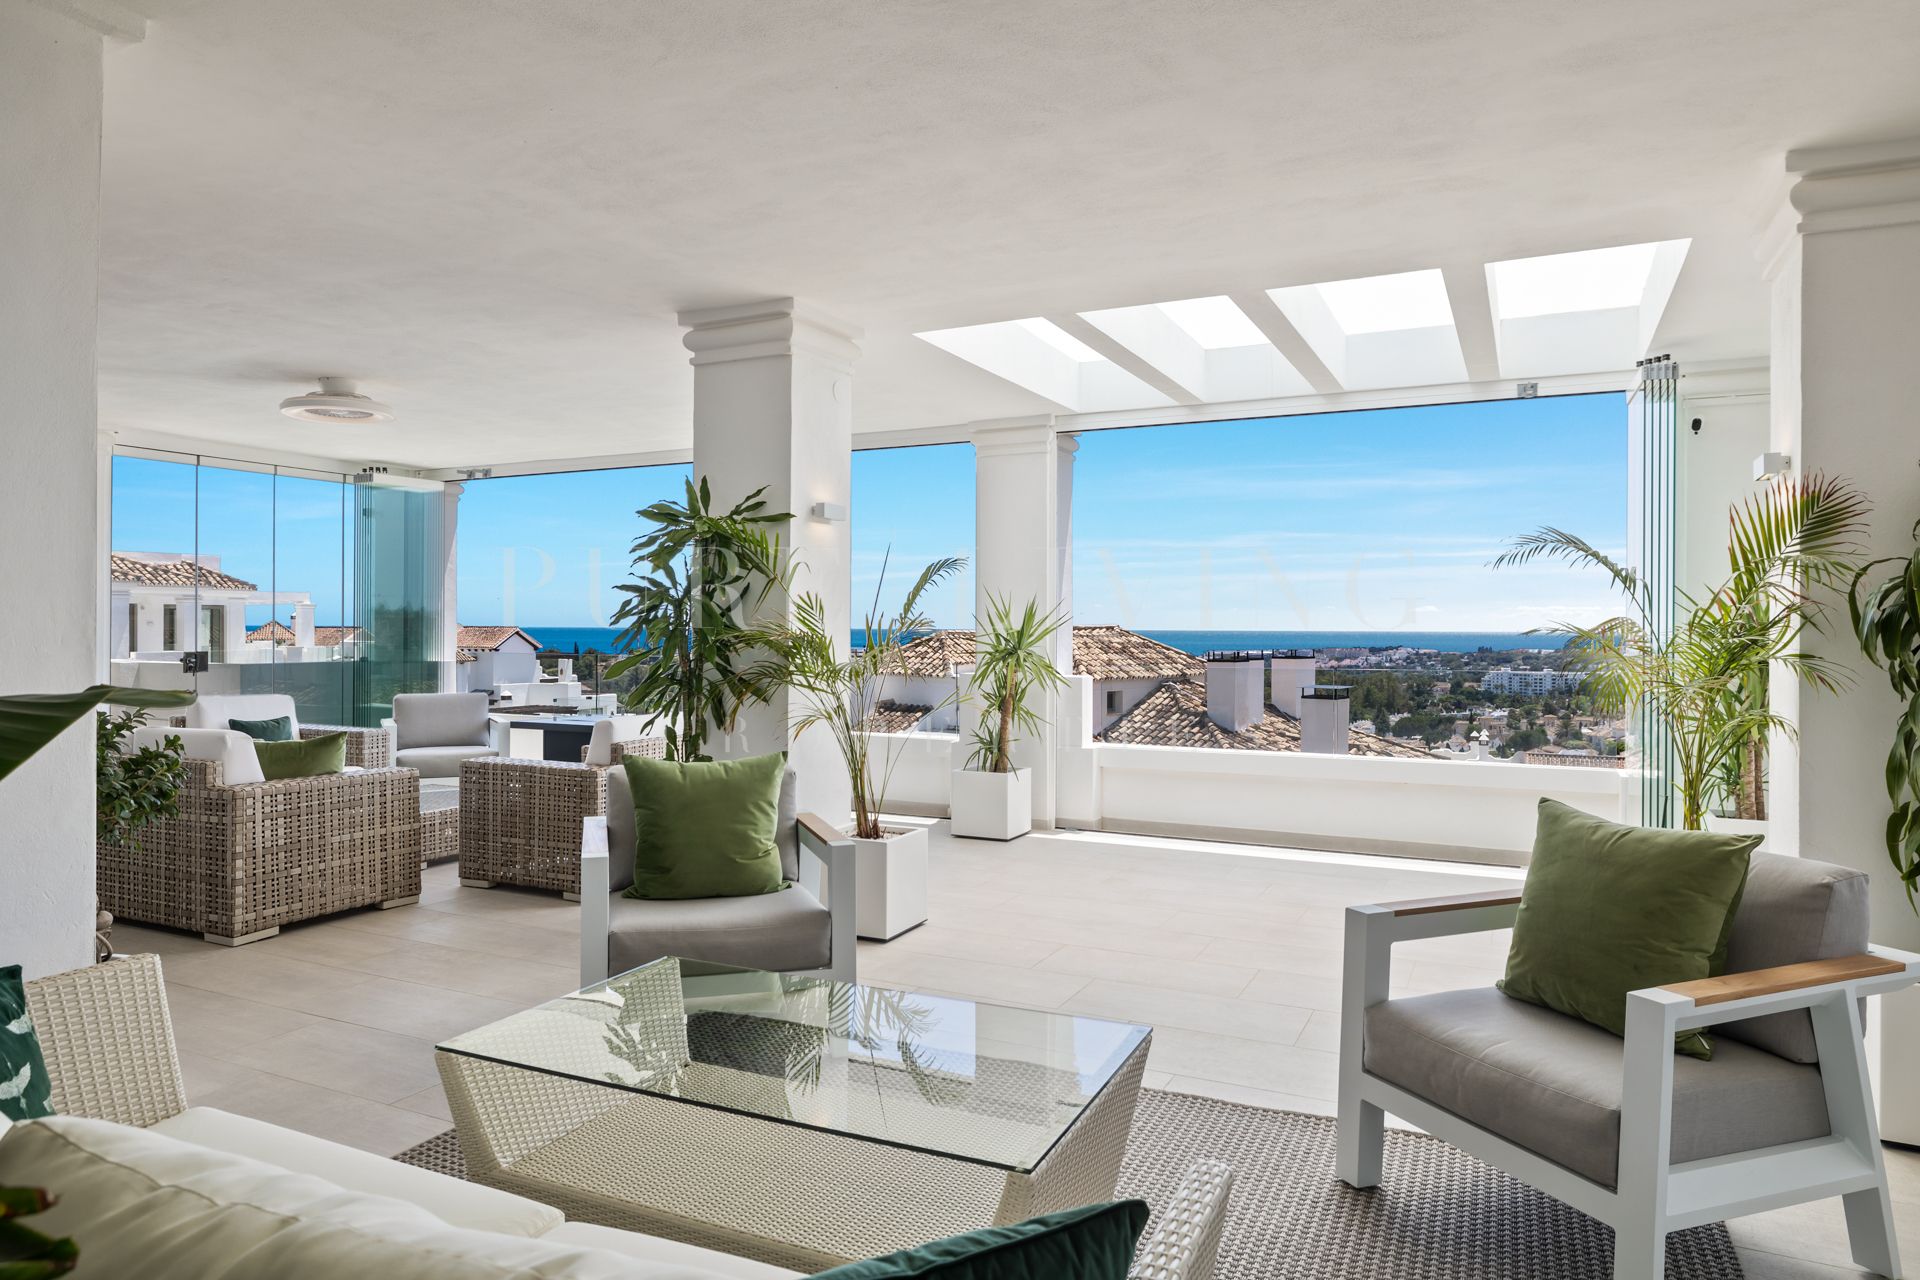 A truly unique and exquisite seven bedroom apartment in Nine Lions Residences, Nueva Andalucia